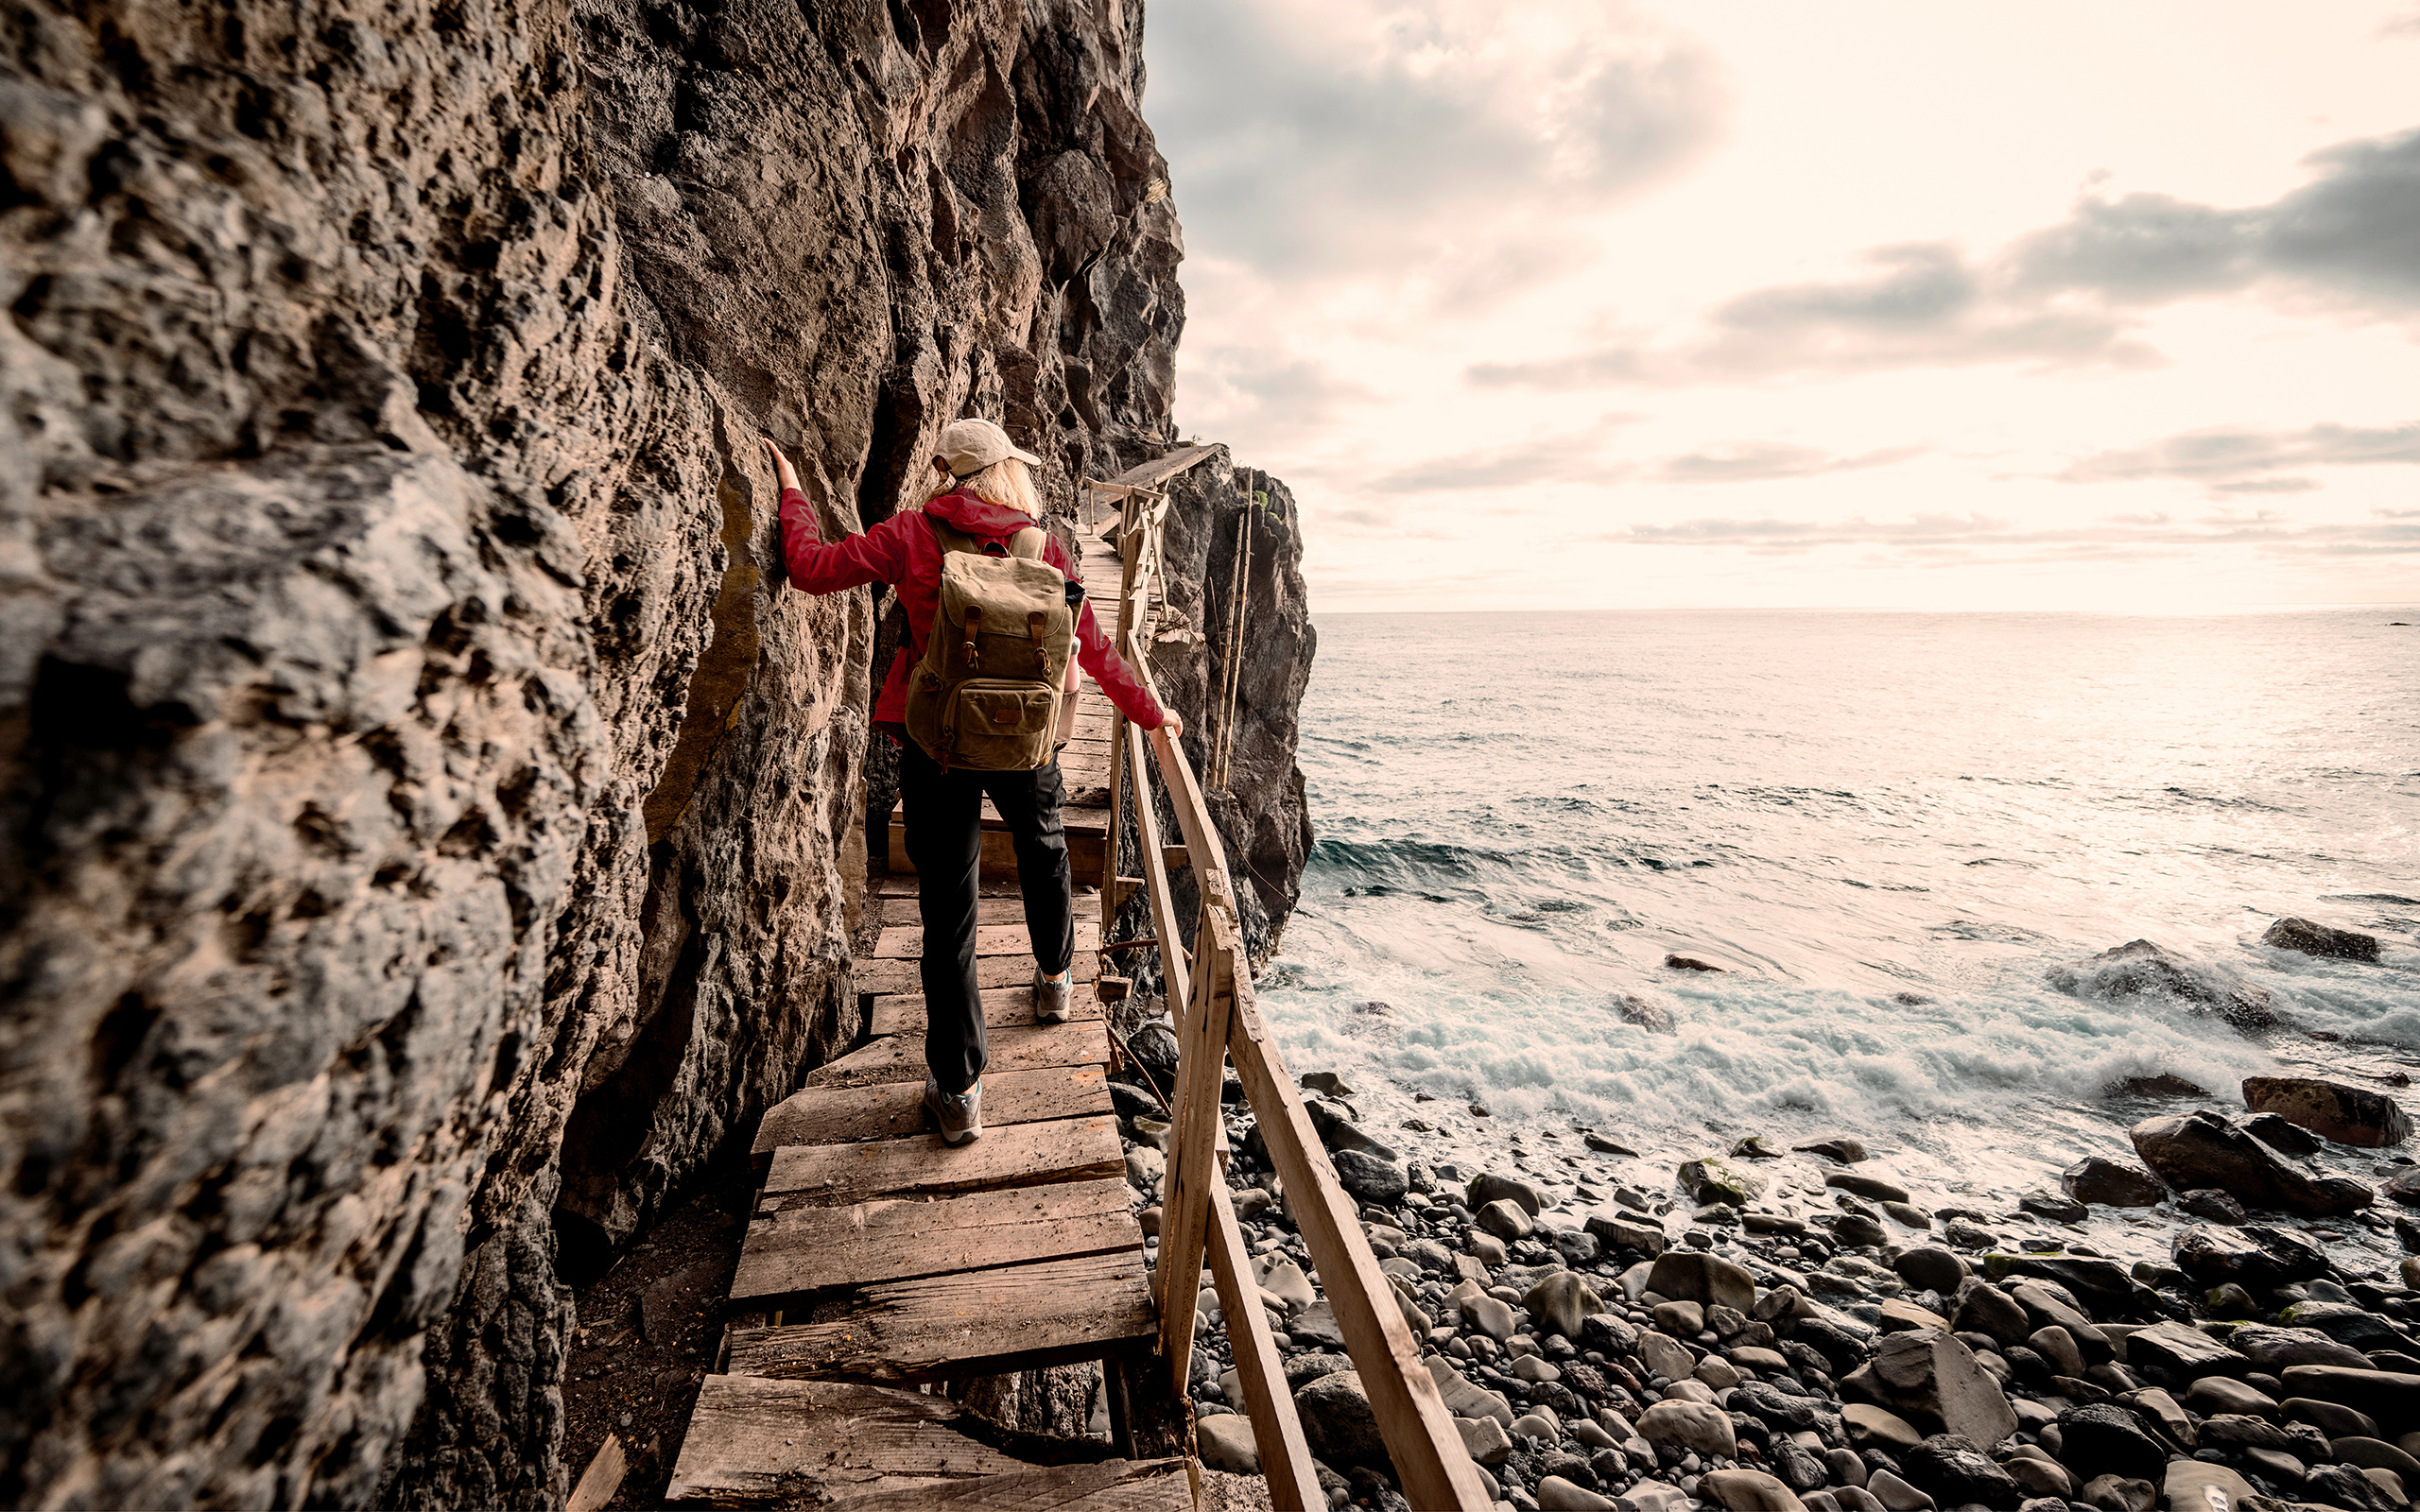 A woman uses a handrail in climbing a wooden ramp by an ocean cliff.